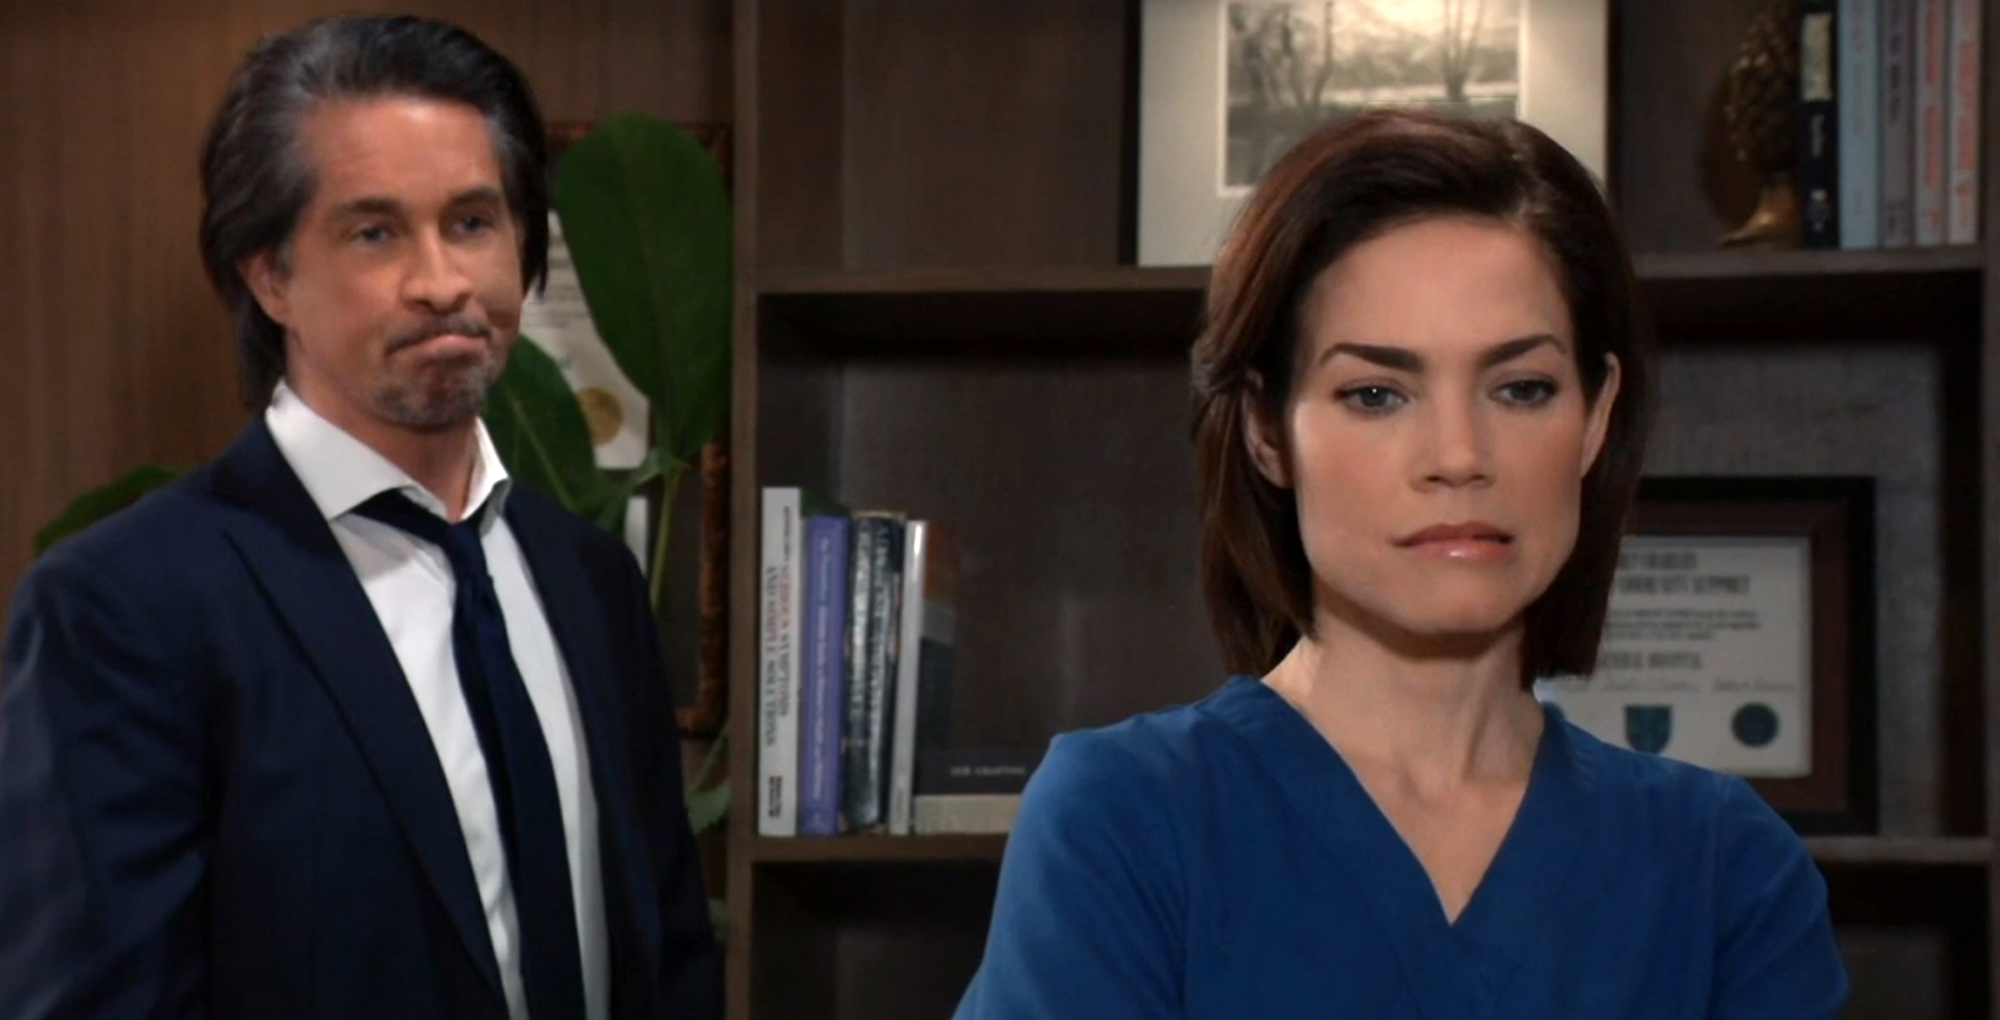 Note To General Hospital: Don't Even Try Putting Elizabeth Back With Finn